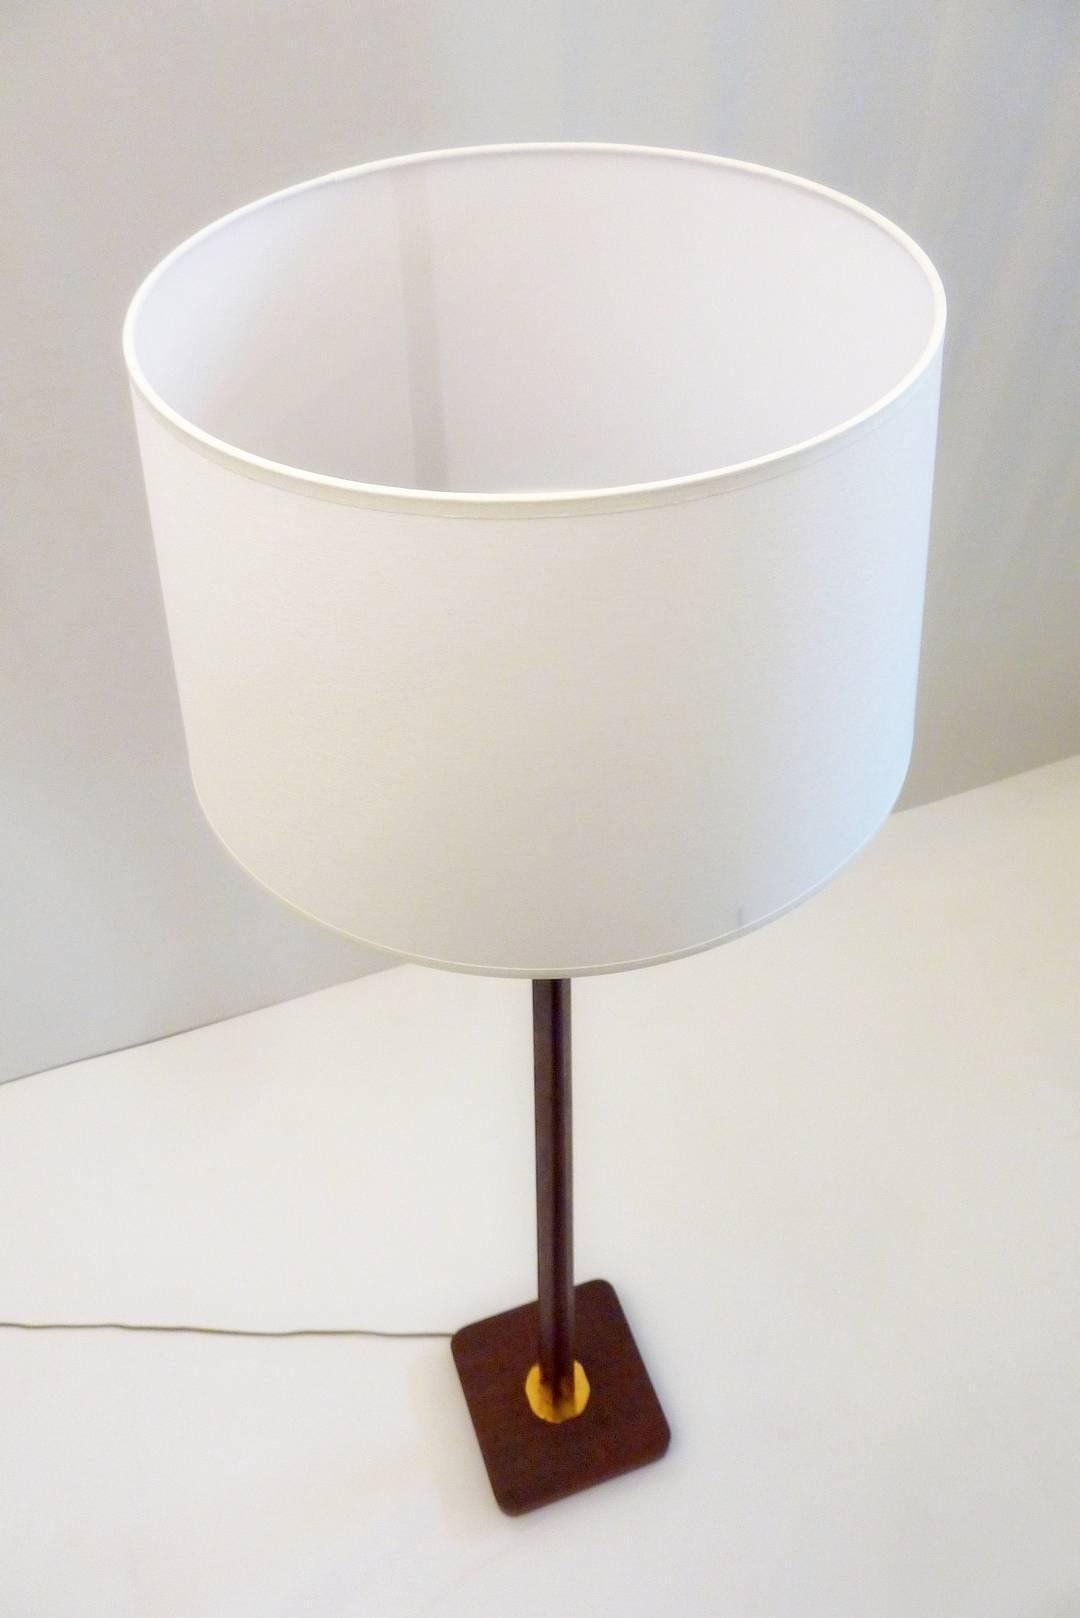 Midcentury floor lamp produced in Sweden in the 1950s. The base is square with an angular shape to the stem of the lamp. The top of the lamp can be tilted as well as standing straight up. Comes with a new crisp white lampshade with a diameter of 35